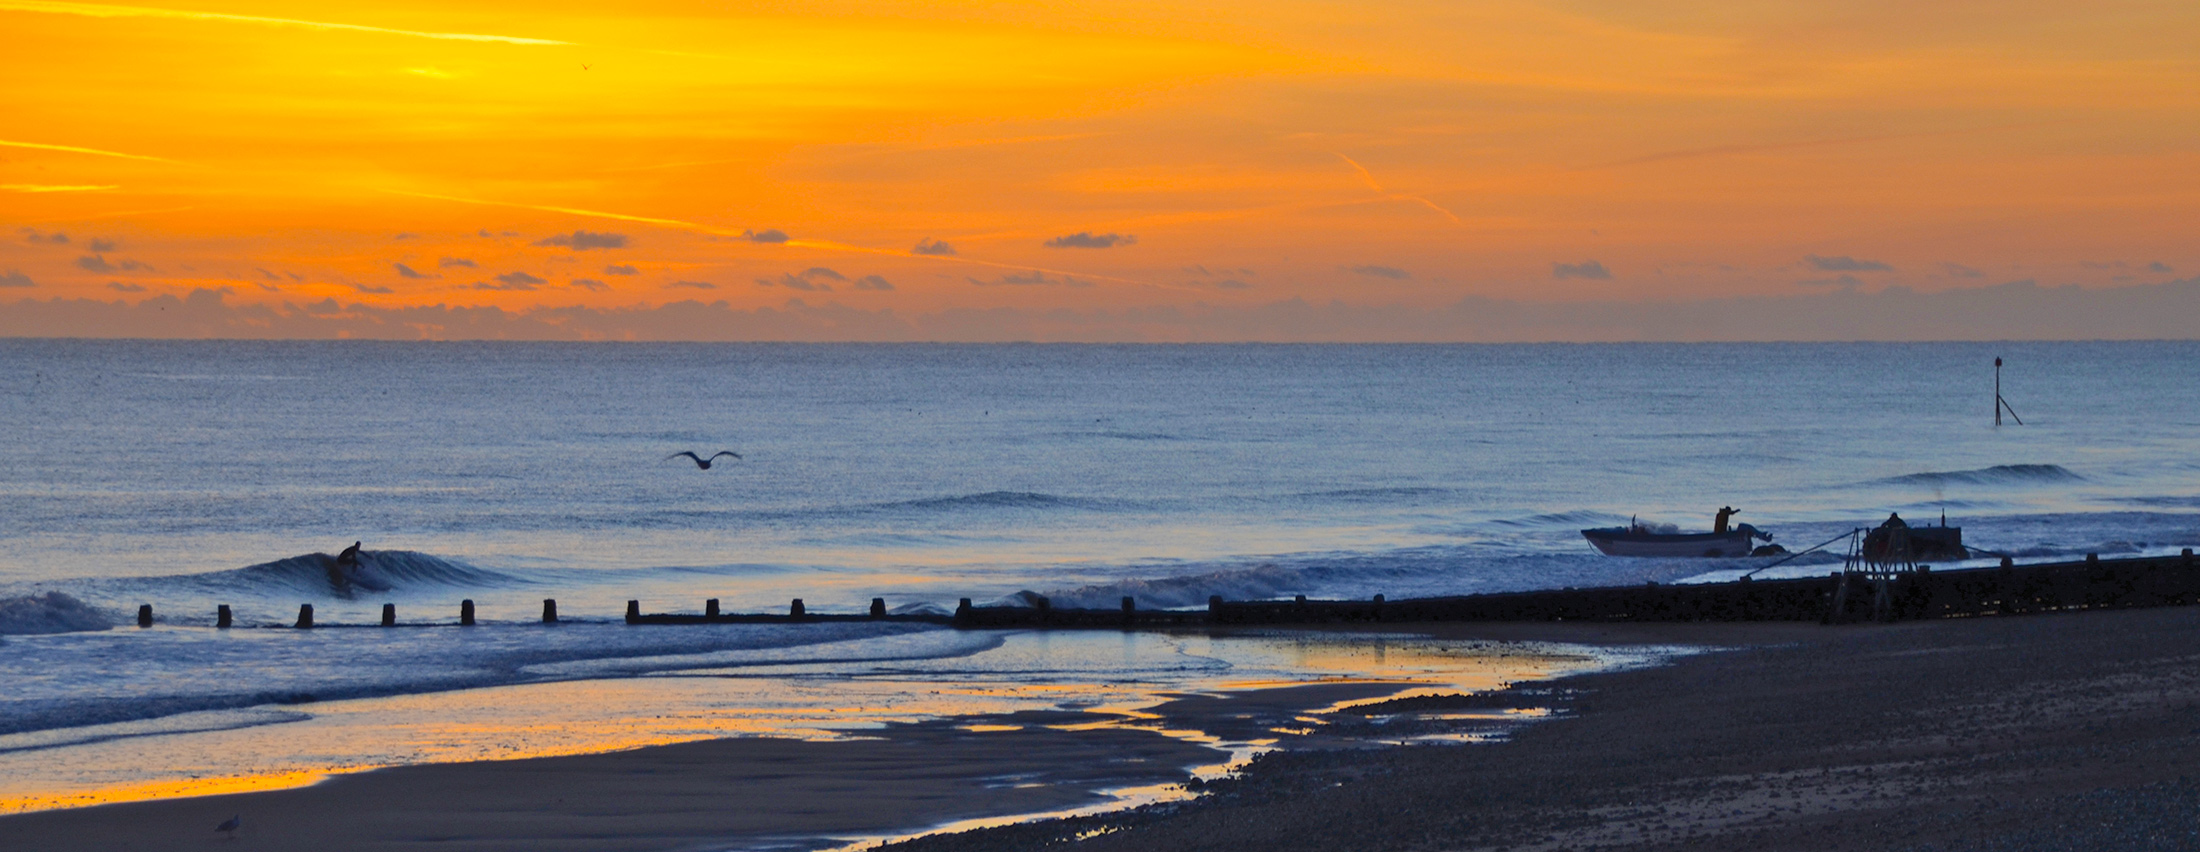 Surfer, Fisherman and Sunrise. Classic Norfolk Surfing.